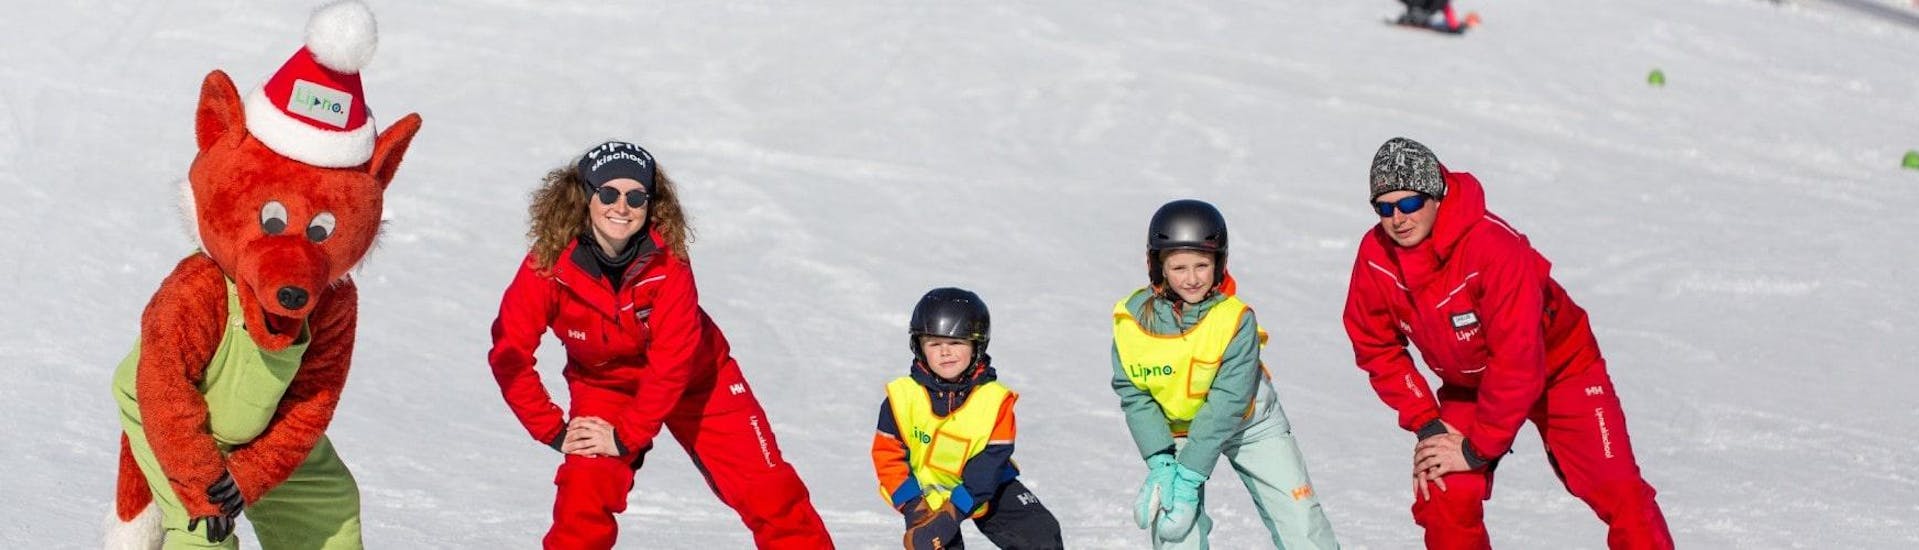 Ski Lessons for Kids (6-15 years) - Group Lesson.